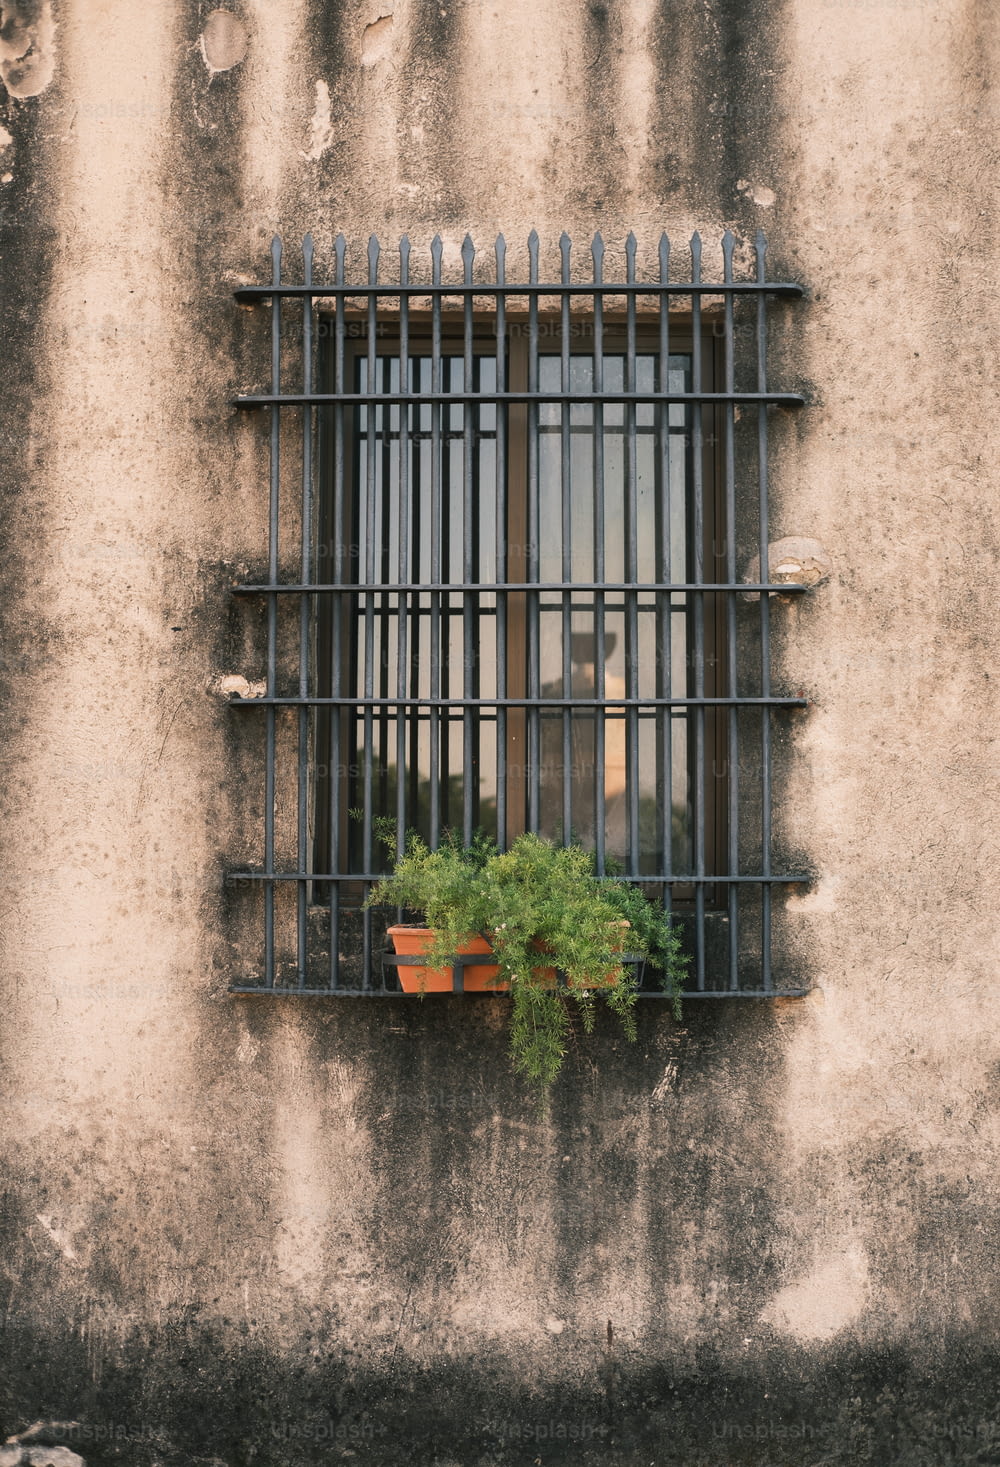 a window with bars and a potted plant in it